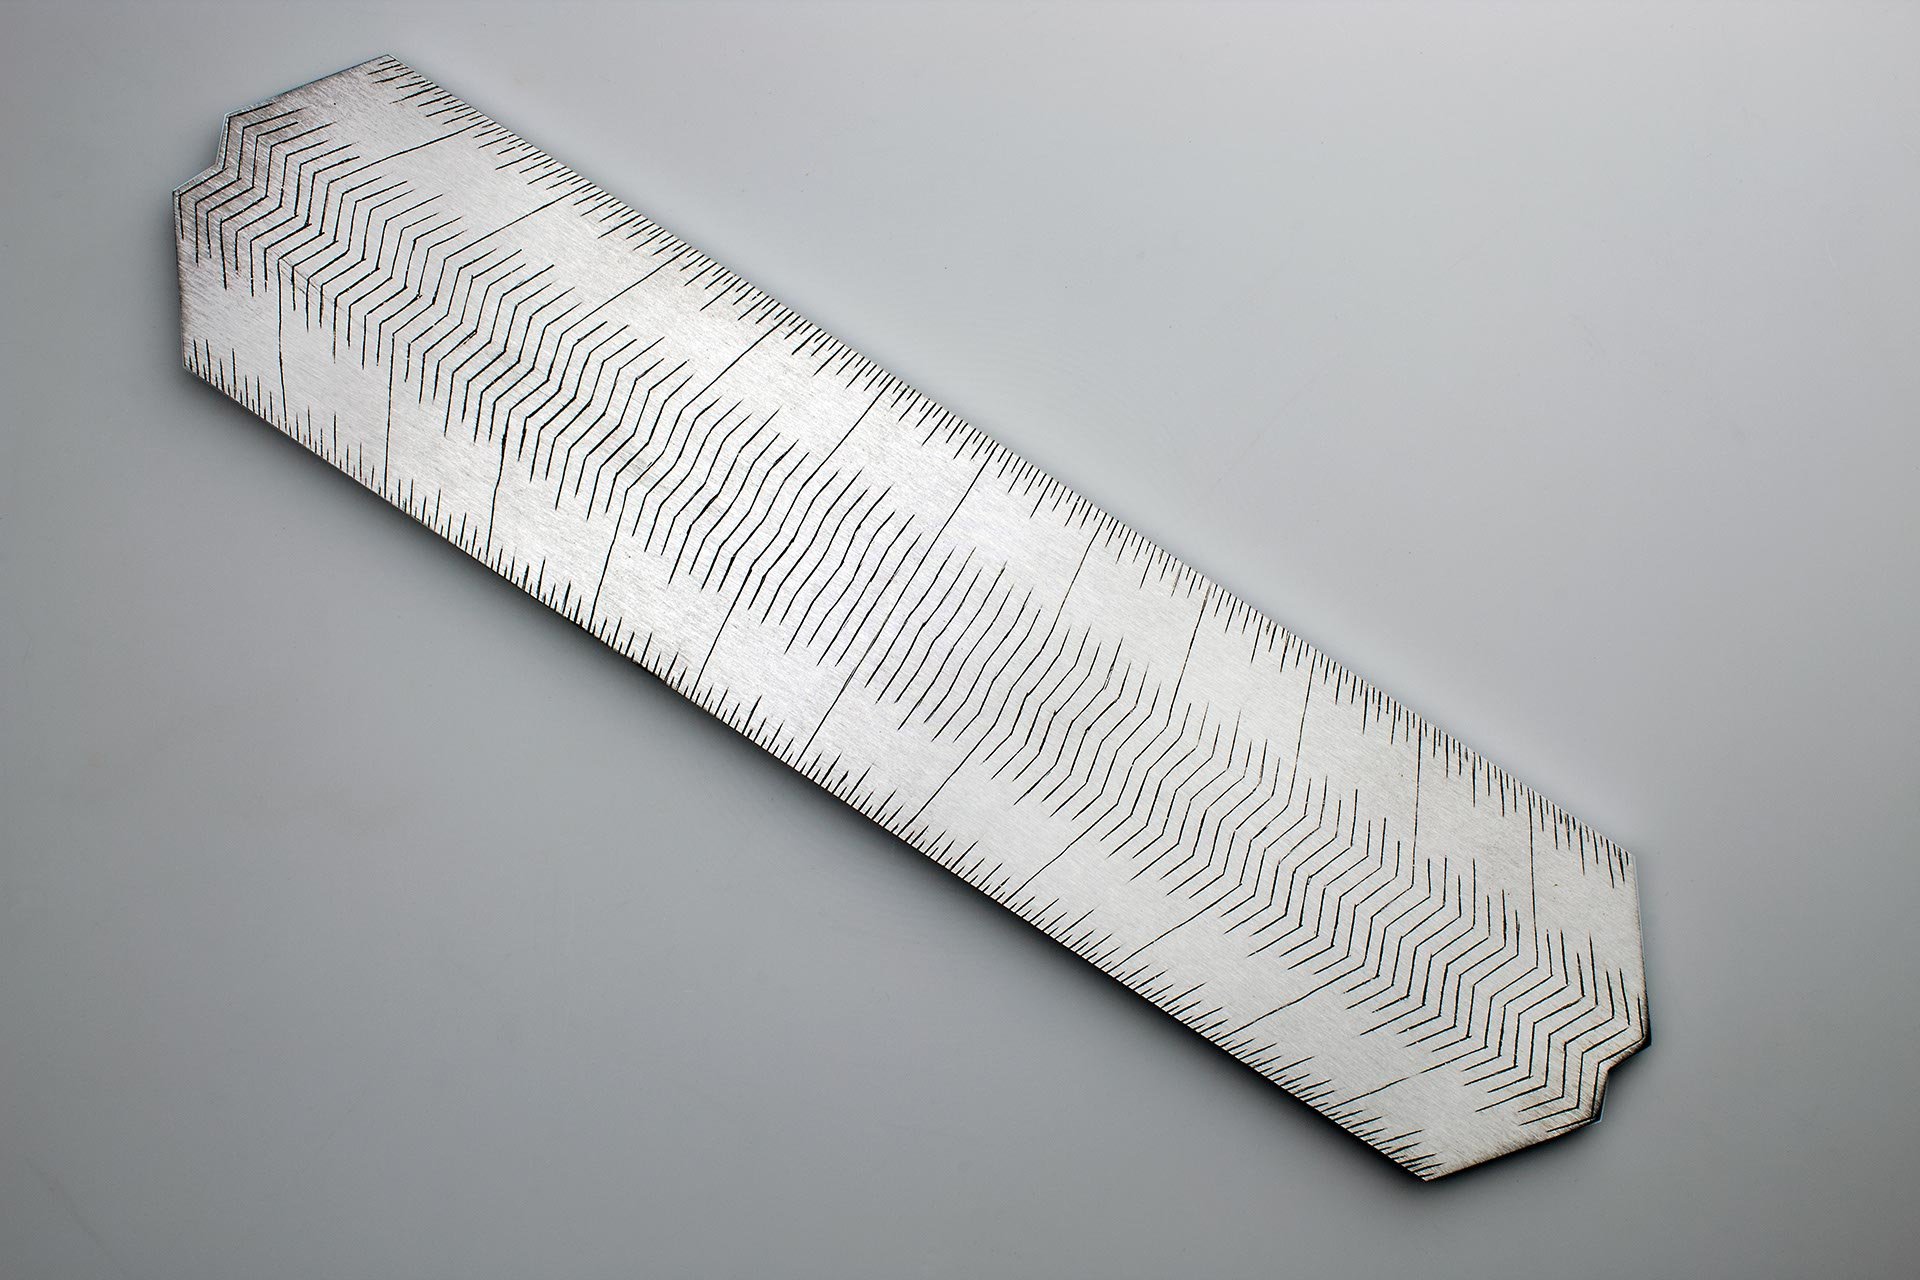 Instrument #94, hand engraved aluminum and ink, 11.625" x 2.625" x .25"